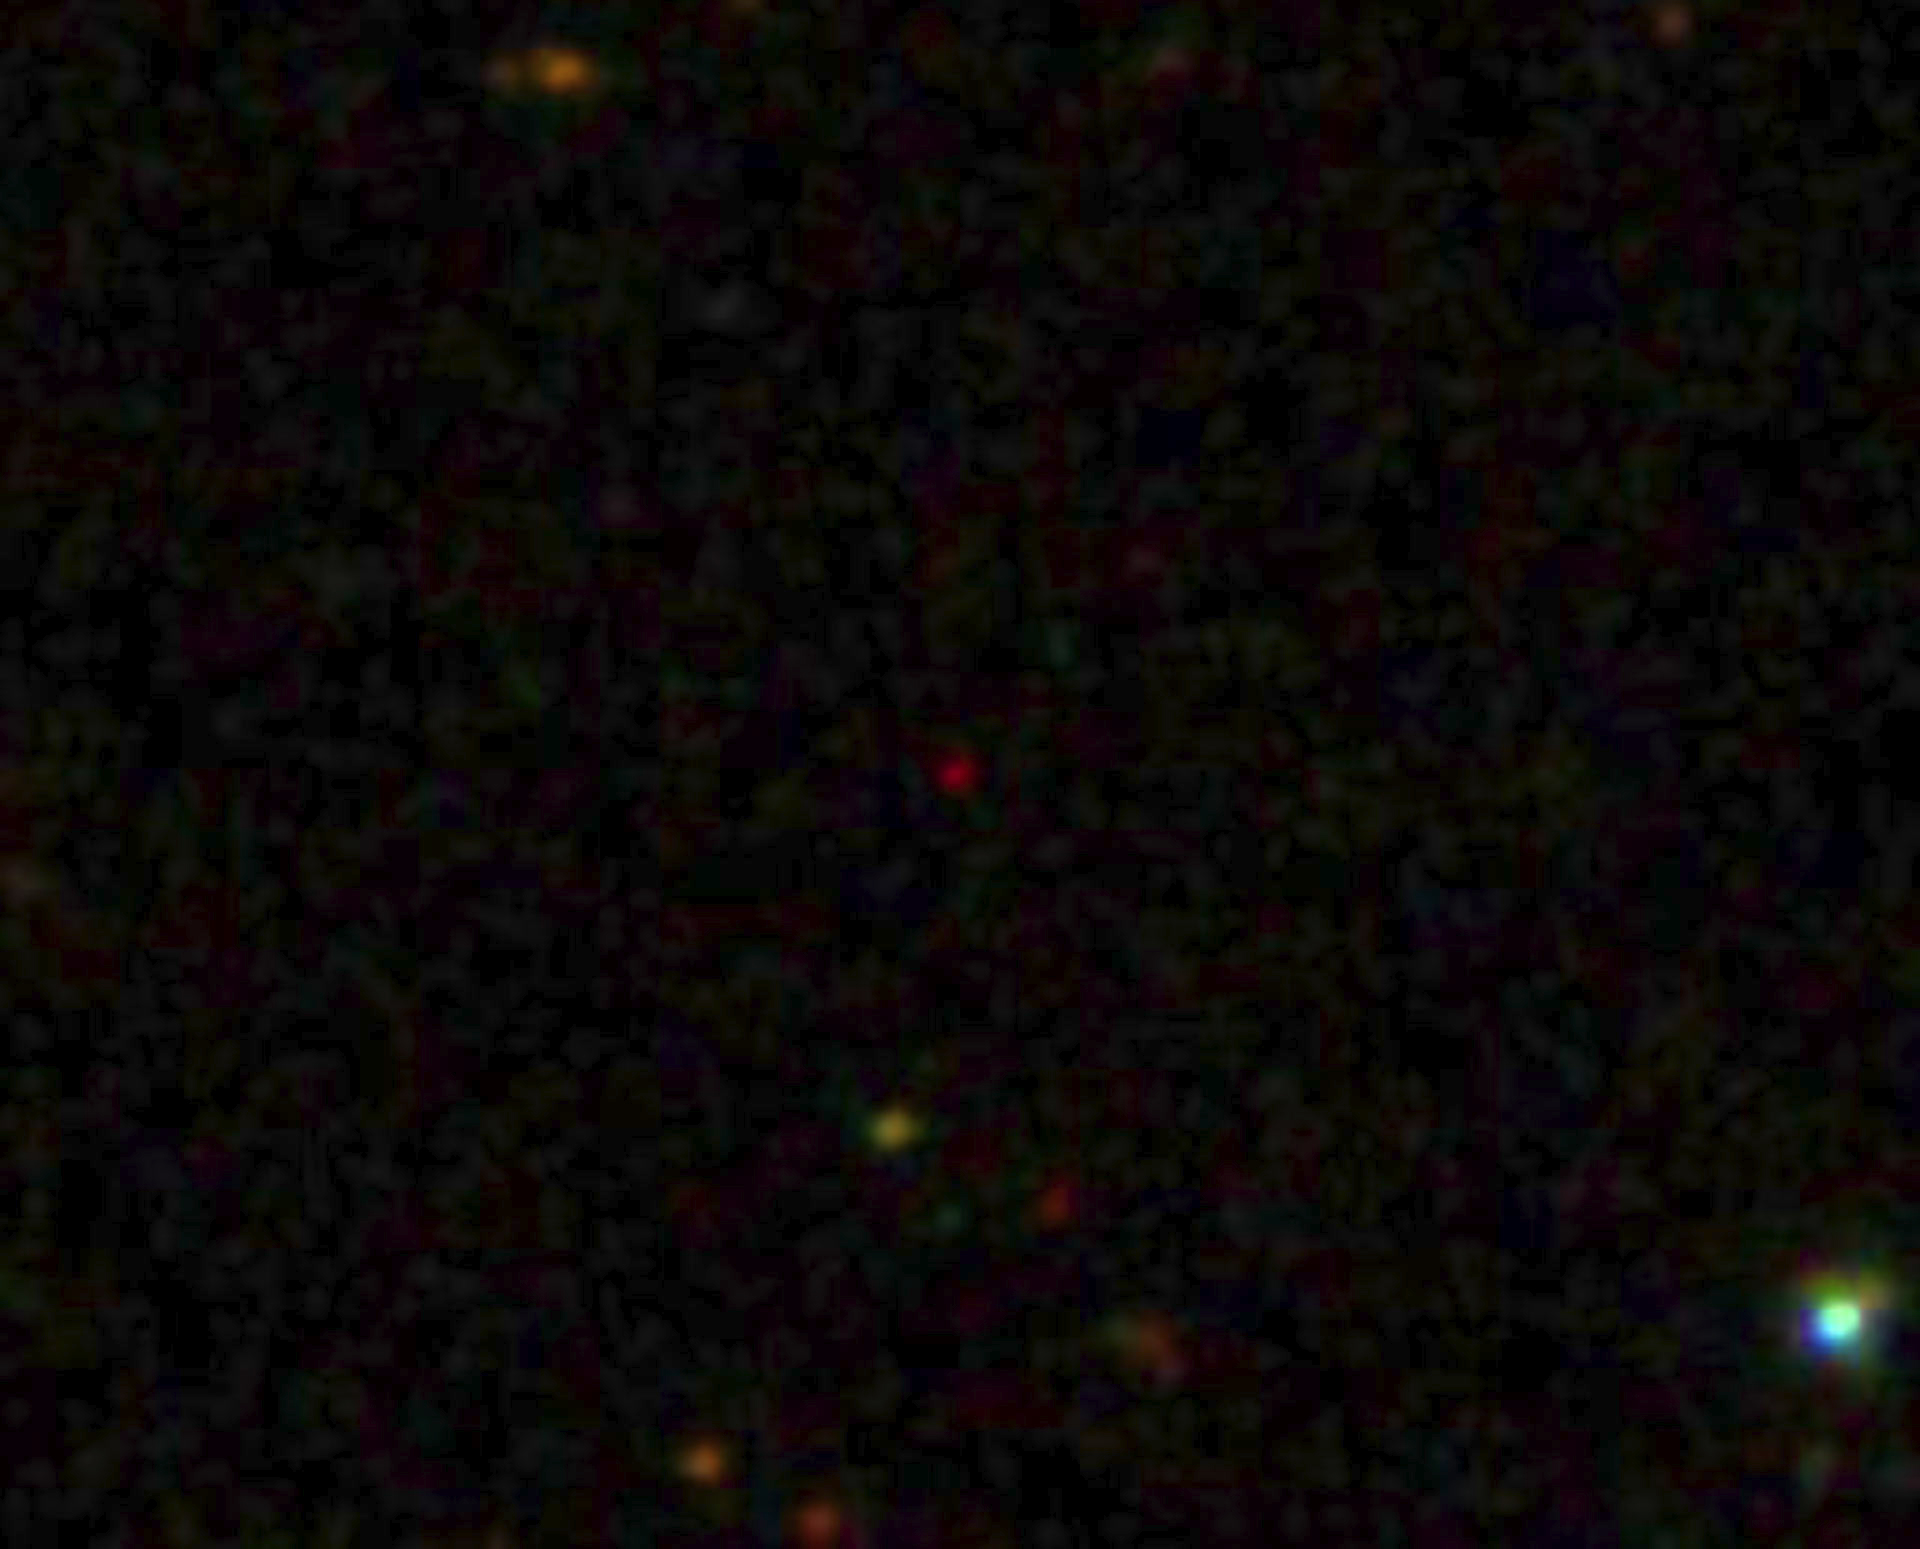 The QUASAR SDSS J0100_2802 (reddish dot at center), one of the brightest and most distant Active Galactic Nuclei in the universe.